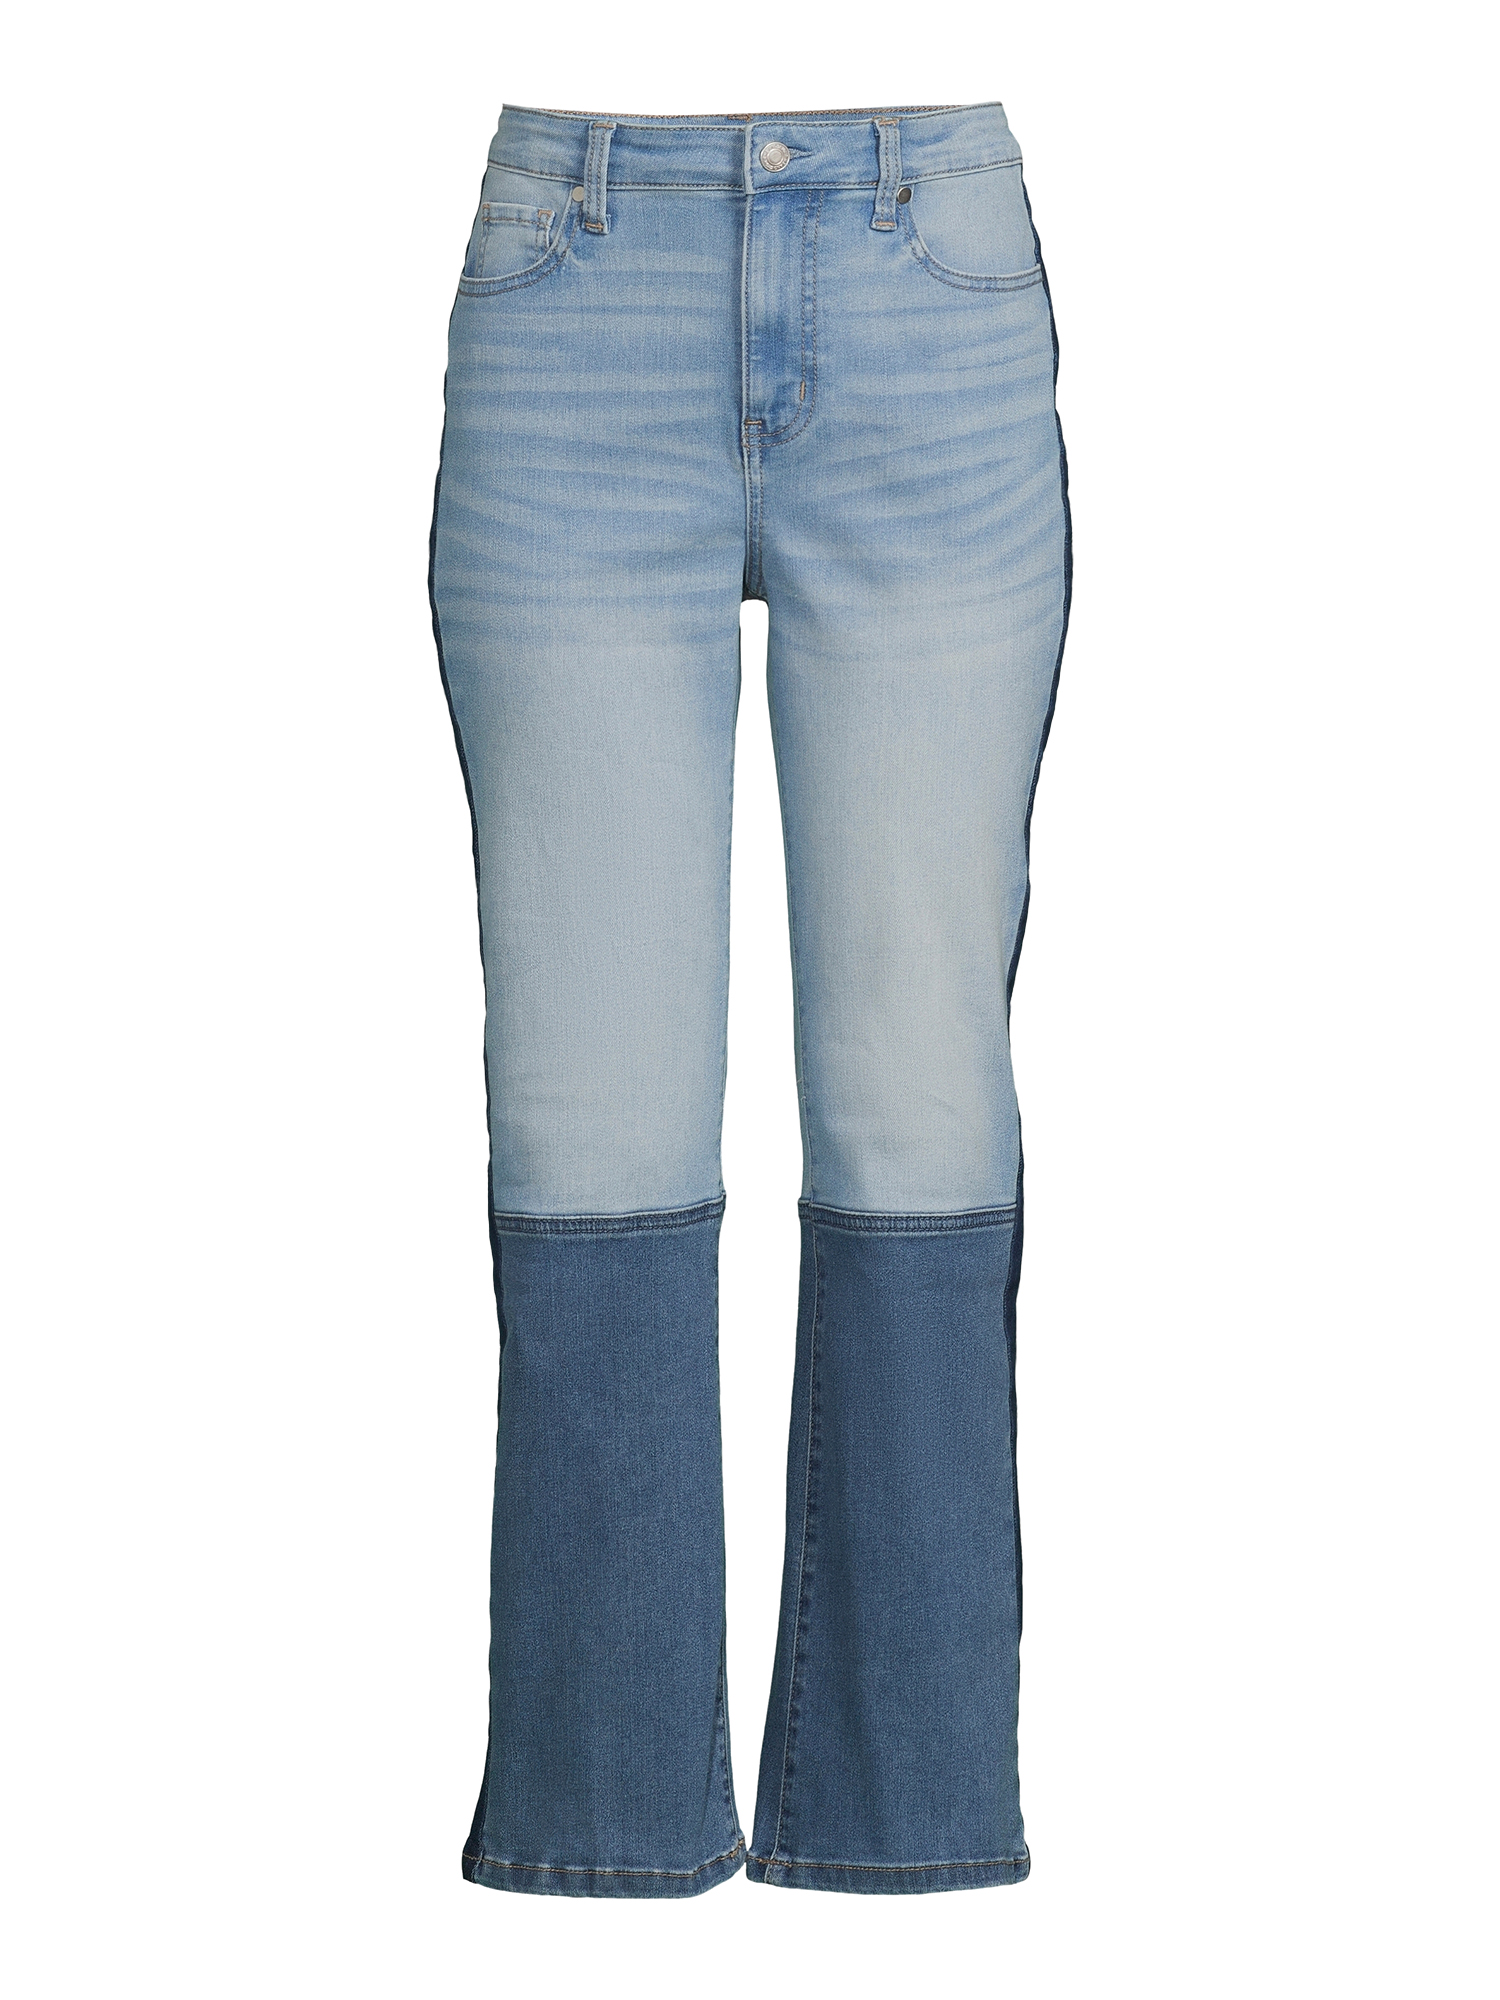 Time and Tru Women's Colorblocked Bootcut Jeans - image 2 of 6